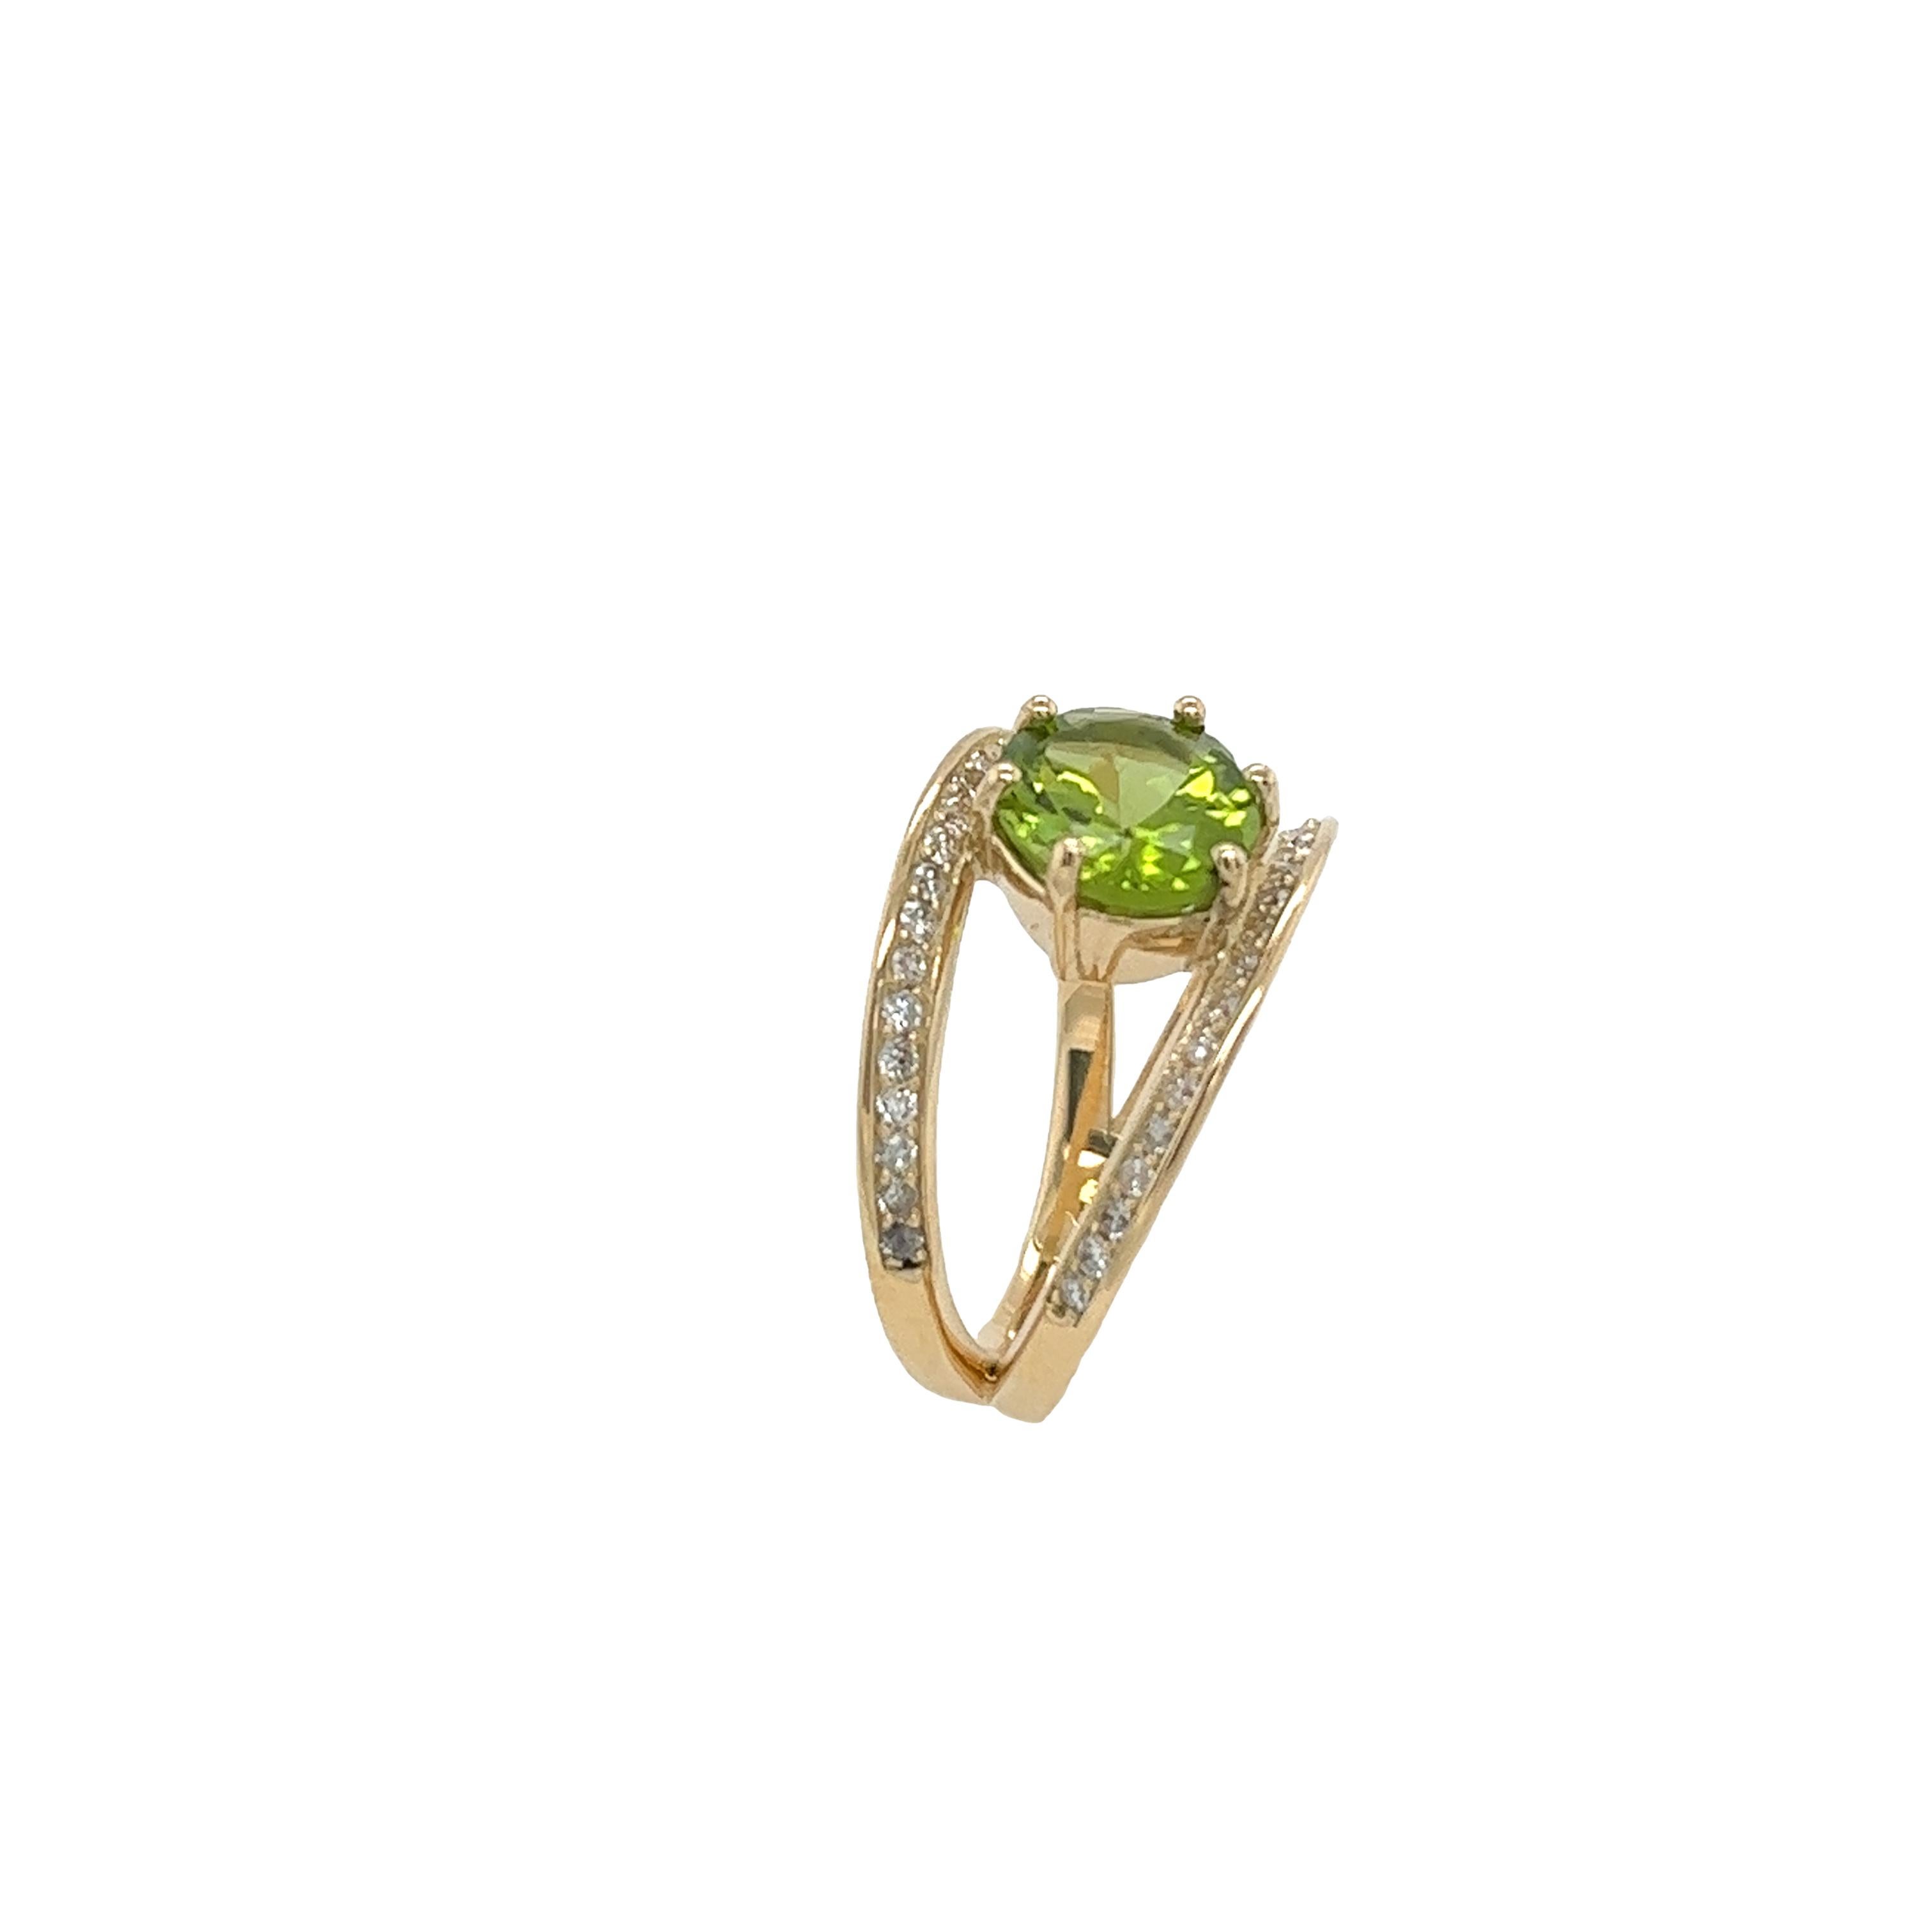 Women's 14ct Yellow Gold Diamond & Peridot Ring With 0.30ct small Diamonds Shoulders For Sale